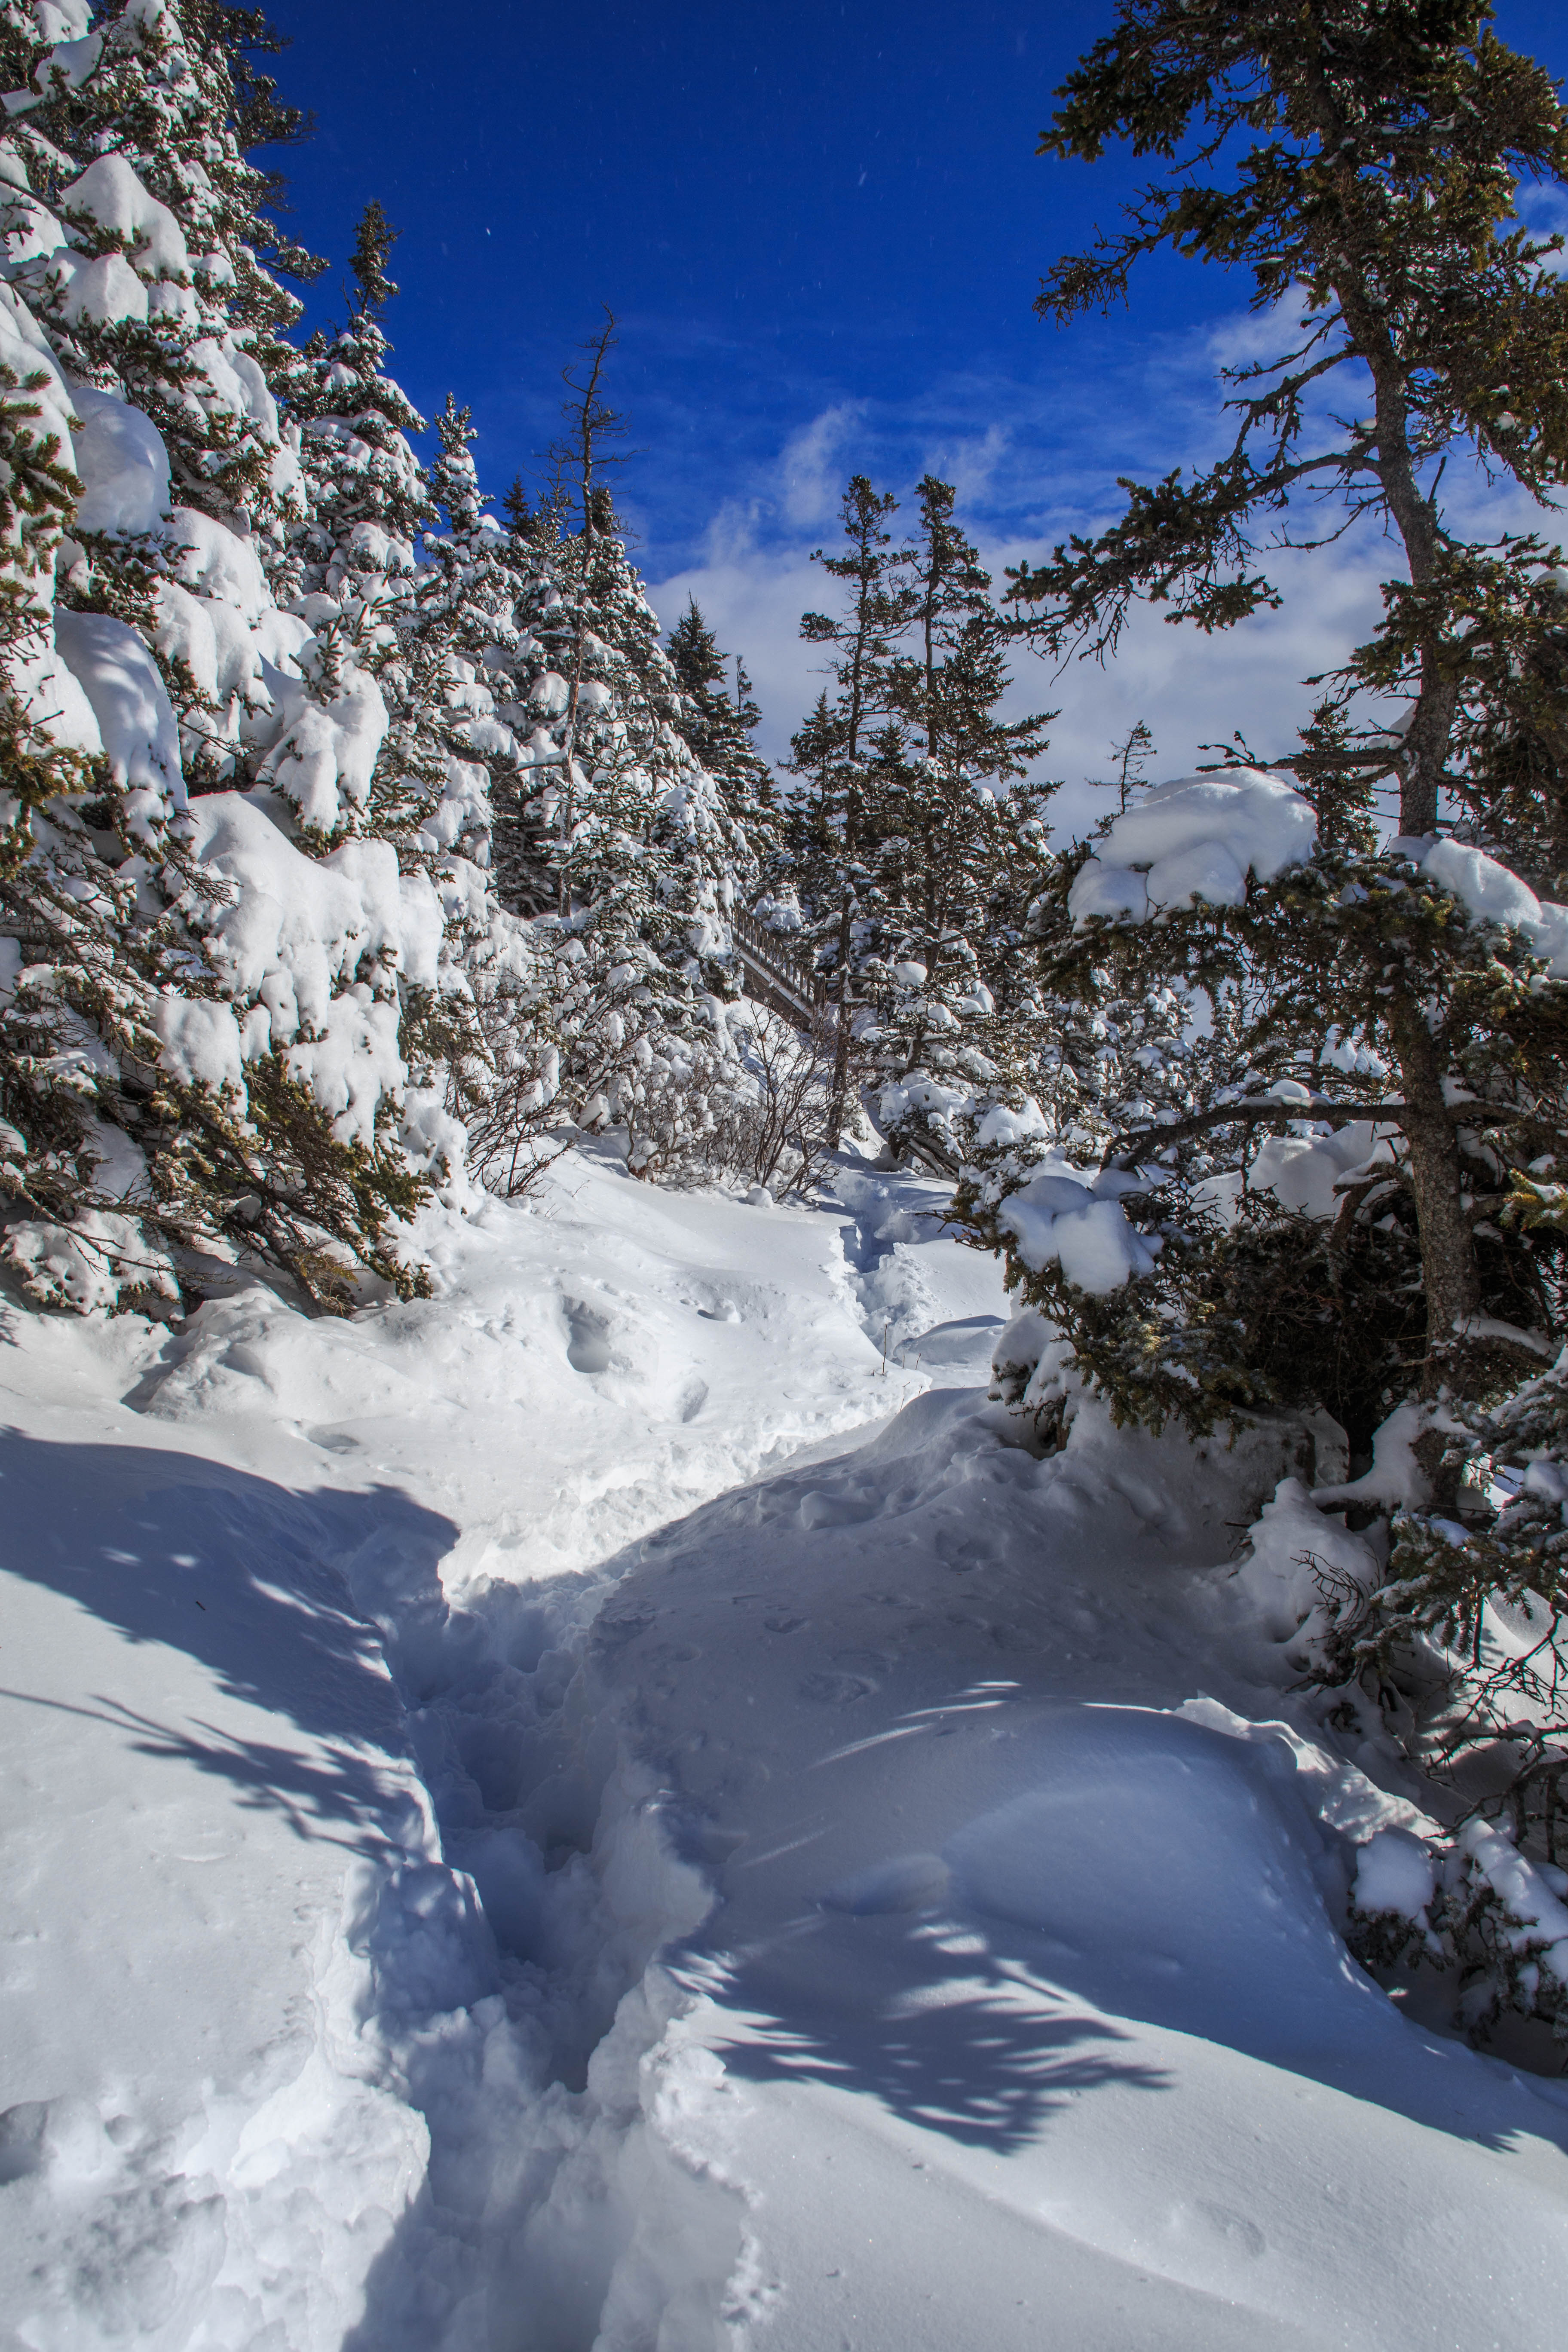 Hiking tracks carved through three feet of snow wind through a heavy snow-laden forest.